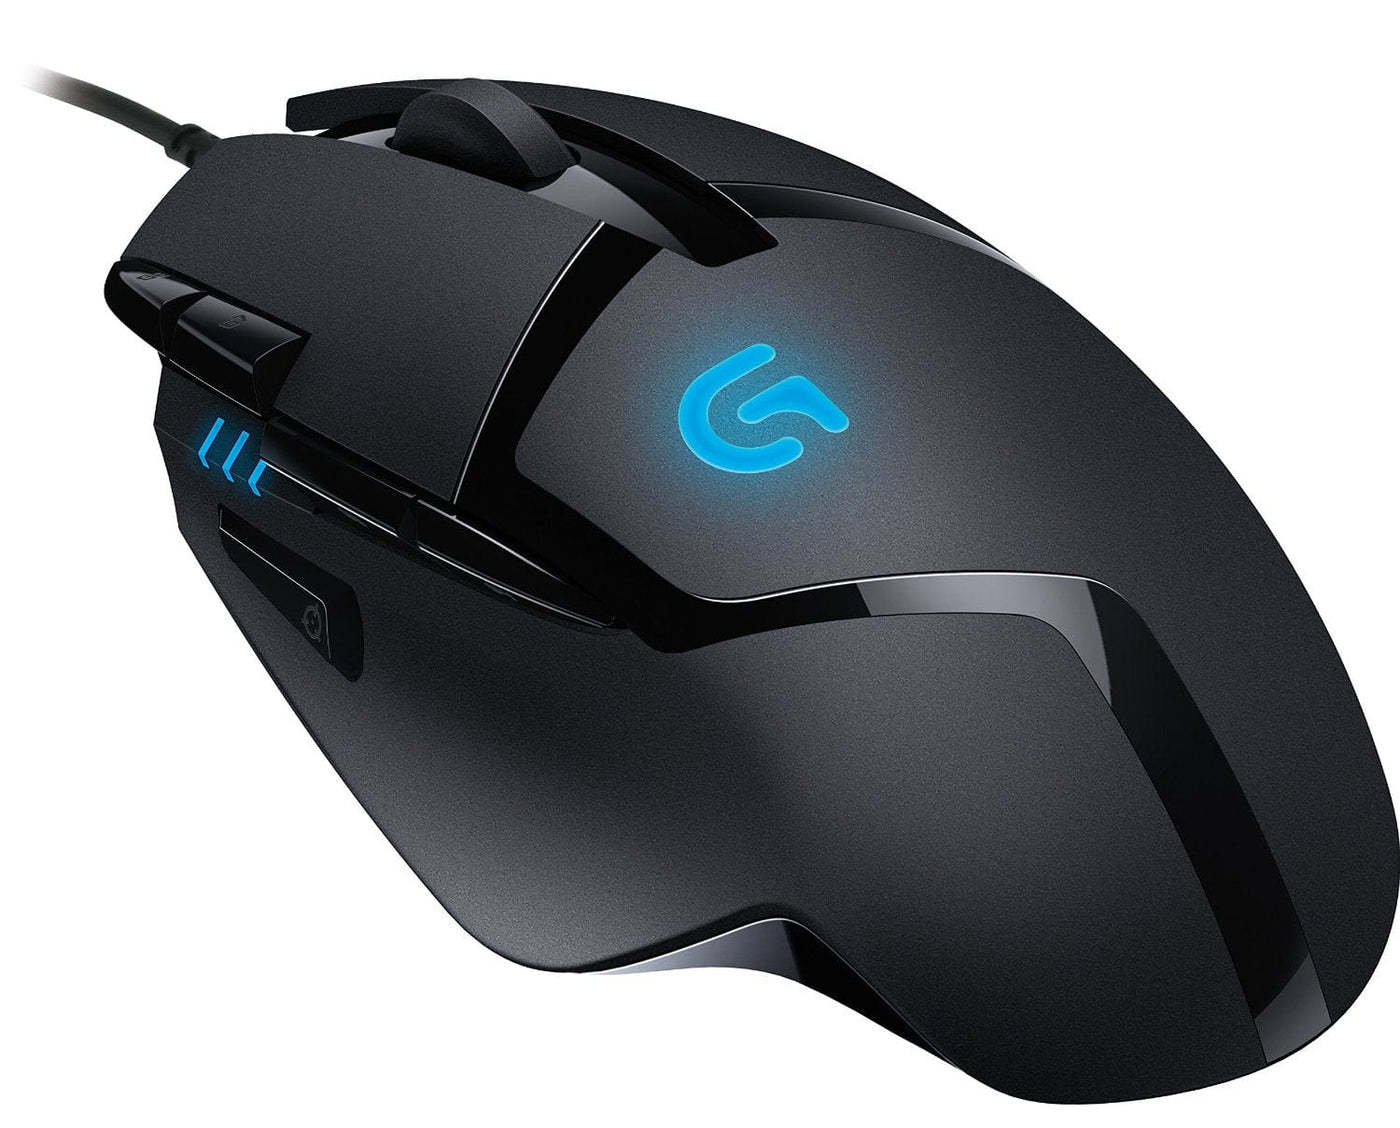 Logitech G402 Hyperion Fury FPS Gaming Mouse with High Speed Fusion Engine